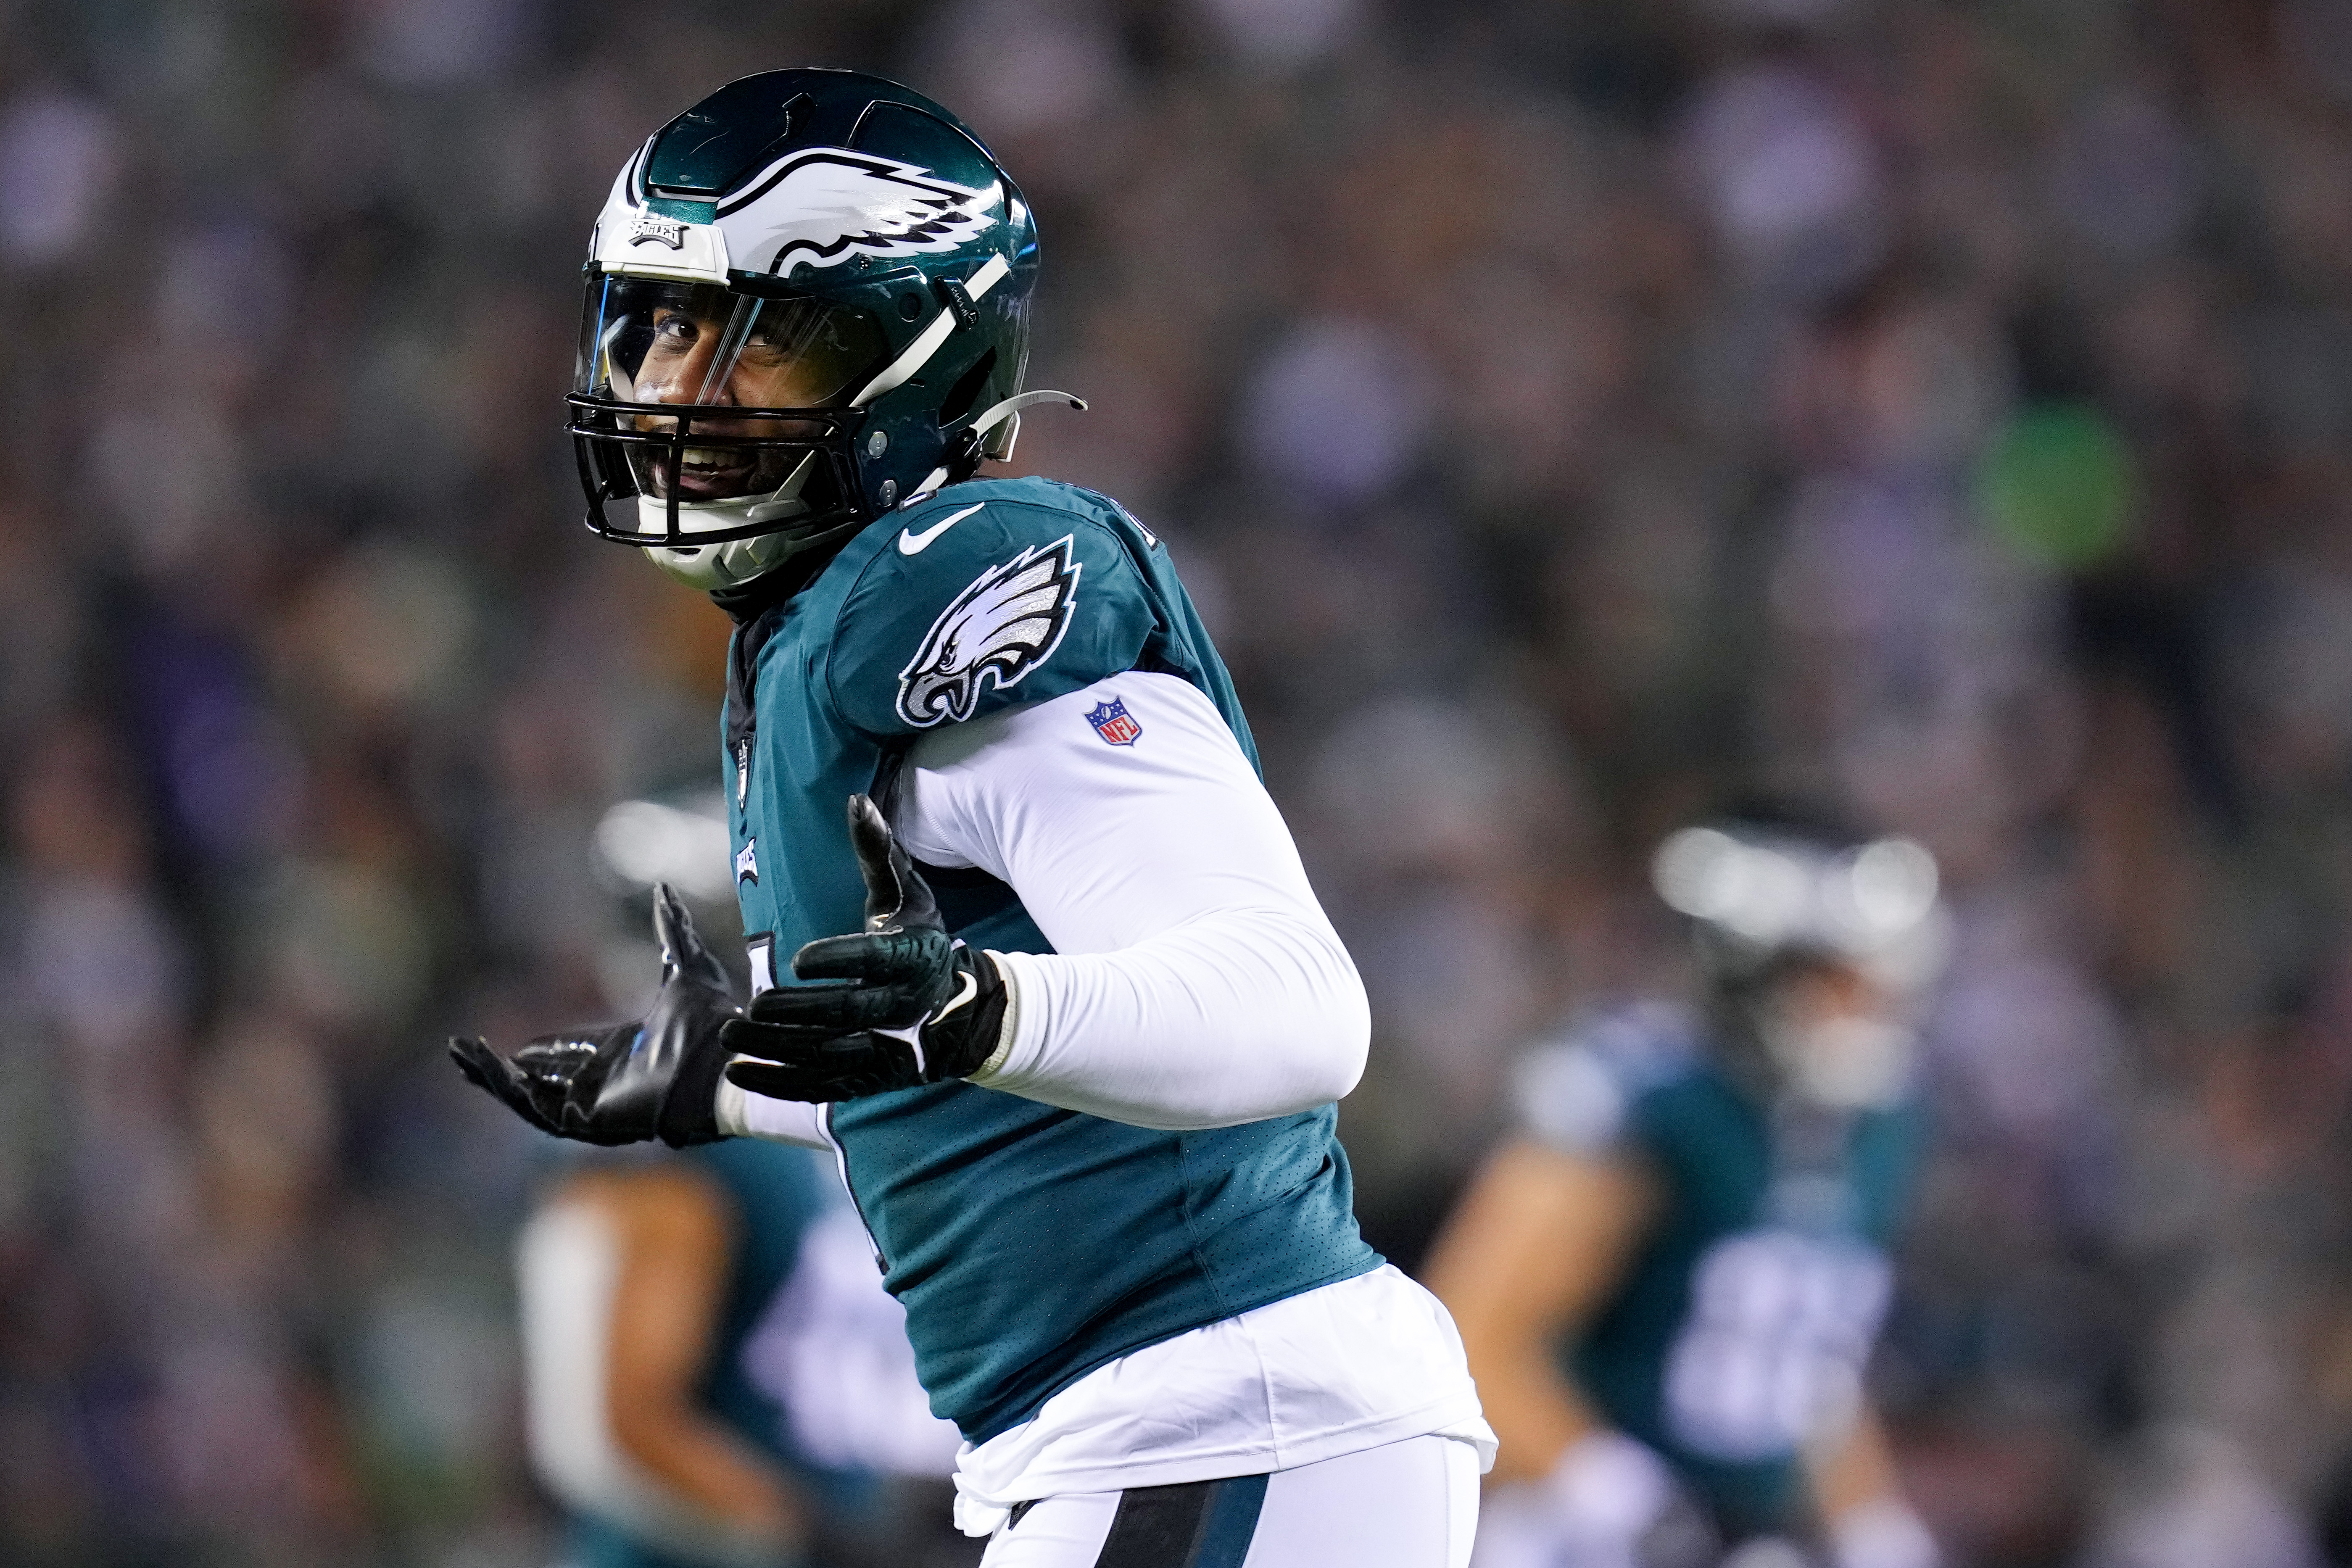 PHILADELPHIA, PENNSYLVANIA - JANUARY 21: Haason Reddick #7 of the Philadelphia Eagles reacts during the second quarter against the New York Giants in the NFC Divisional Playoff game at Lincoln Financial Field on January 21, 2023 in Philadelphia, Pennsylvania. 